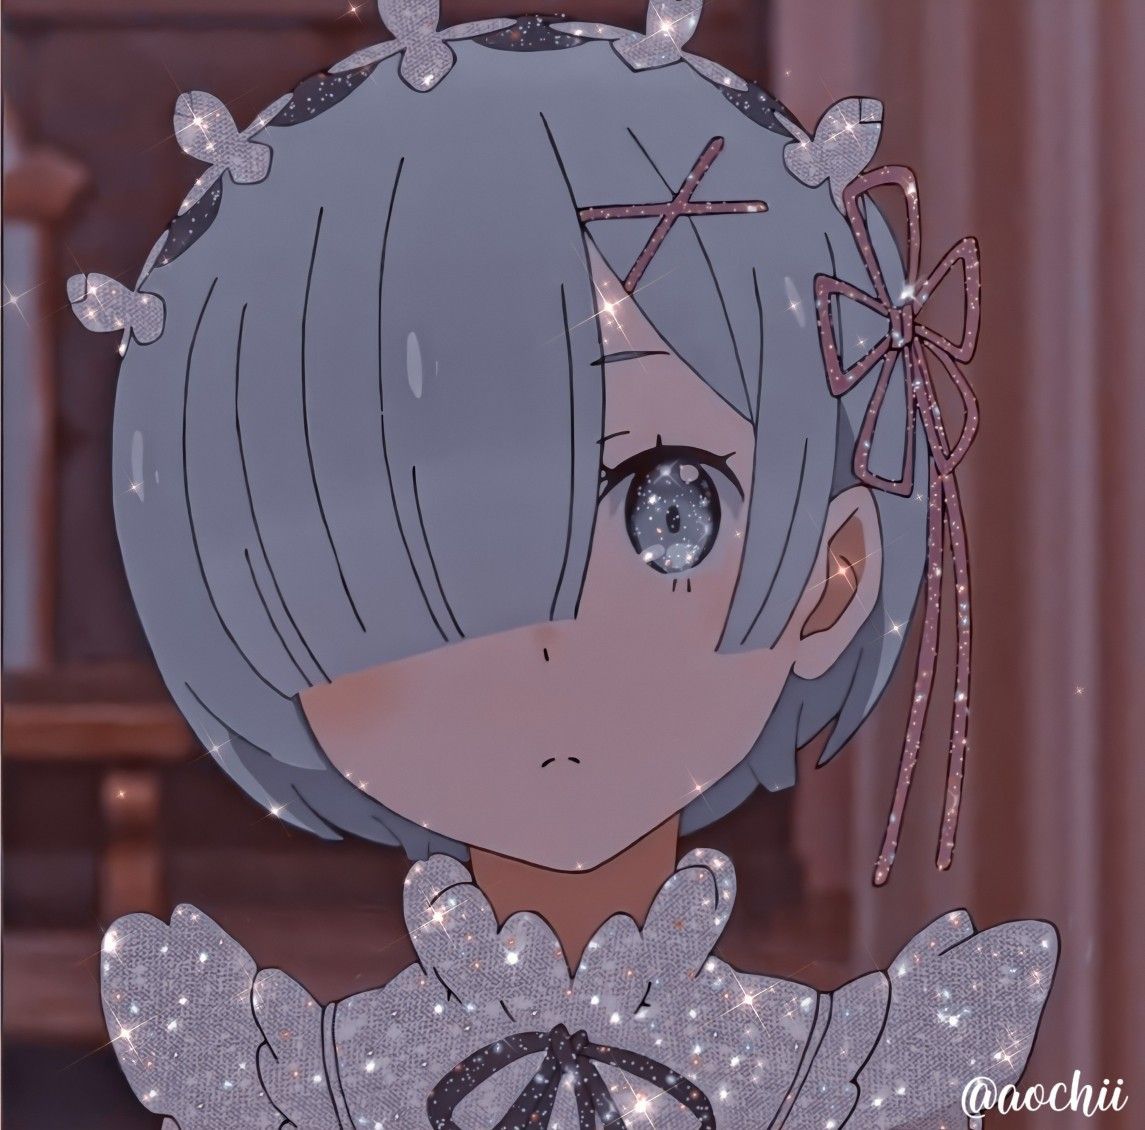 Rem •. Icon. Aesthetic anime, Anime, Best anime shows